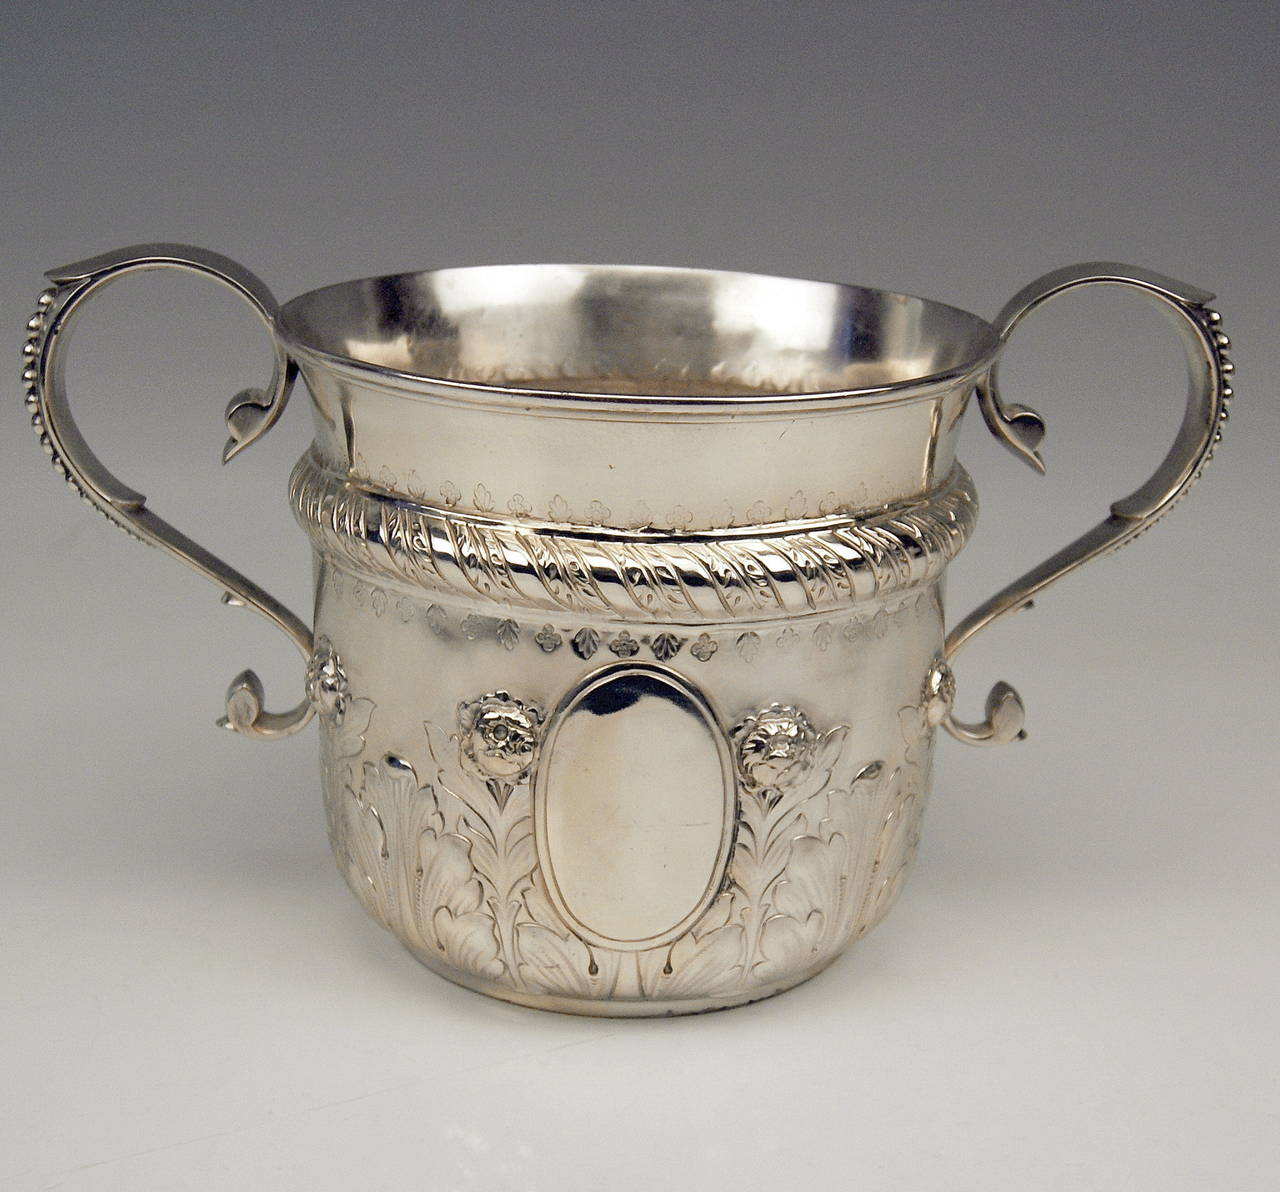 Silver gorgeous Champagne &  Wine Cooler vintage  (last quarter of 19th century)  of finest appearance

____________________________________________________________

 !!  SILVER WEIGHT:  27.51 OZ   780 GRAMS